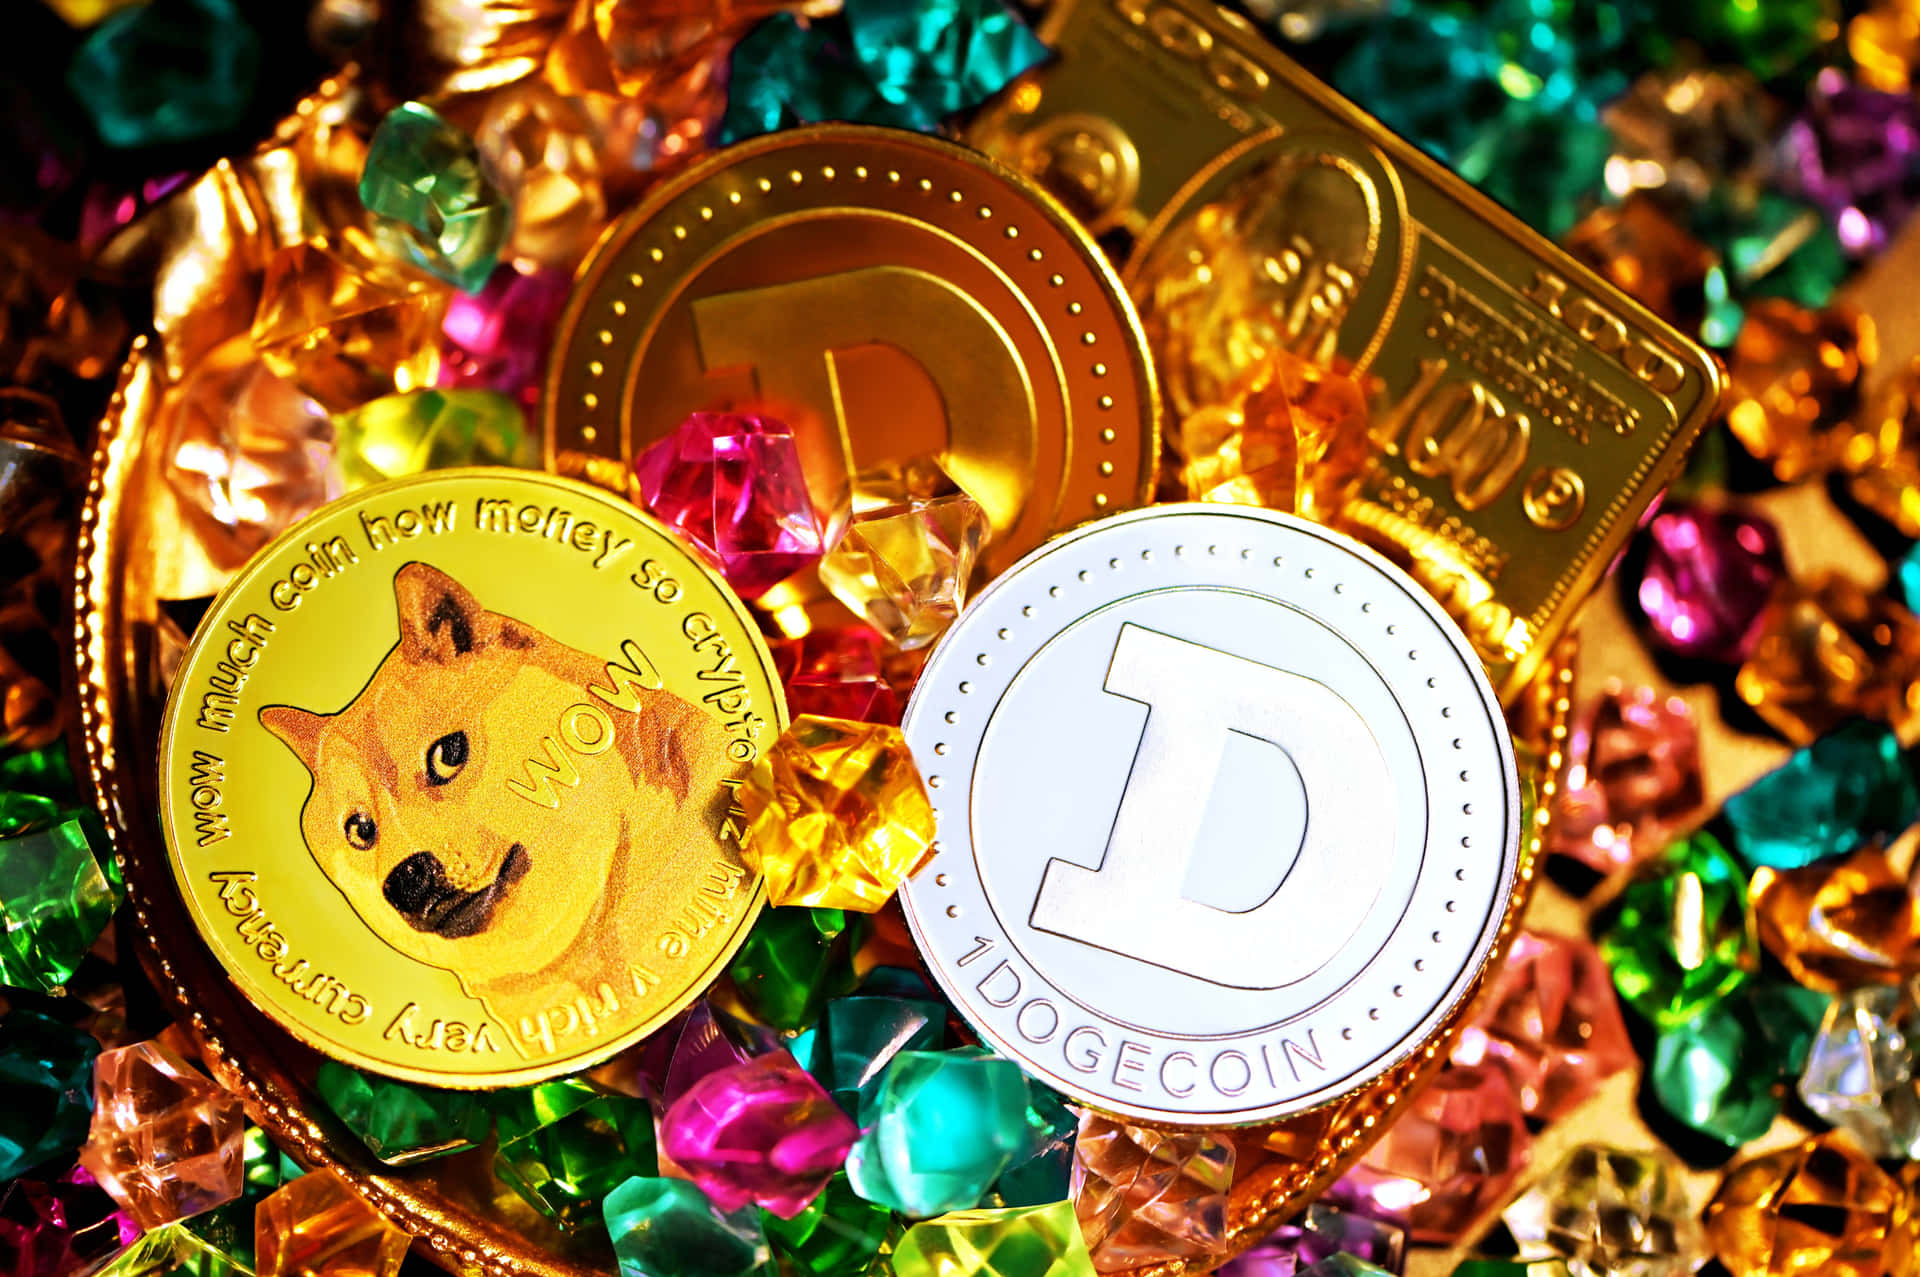 Dogecoin soaring high in the digital currency market